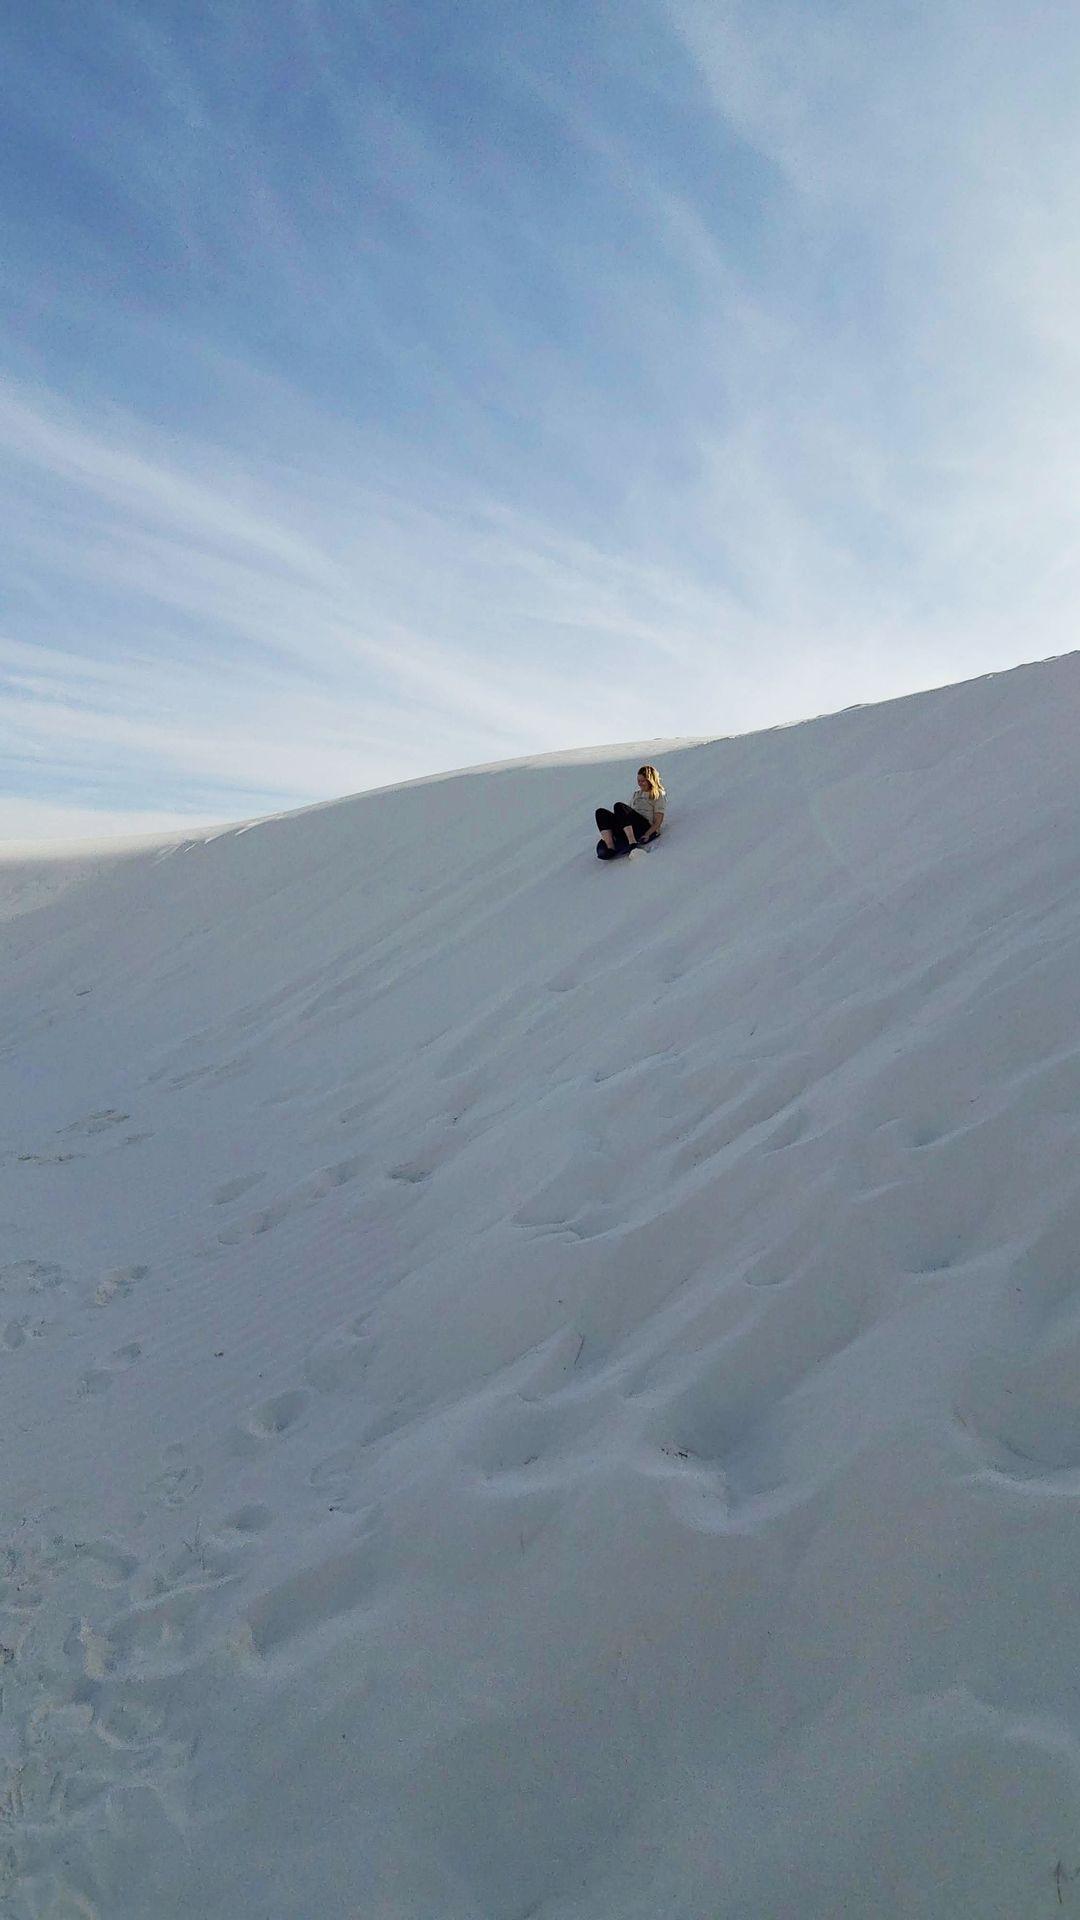 Lydia sledding down a hill of white sand in the distance.